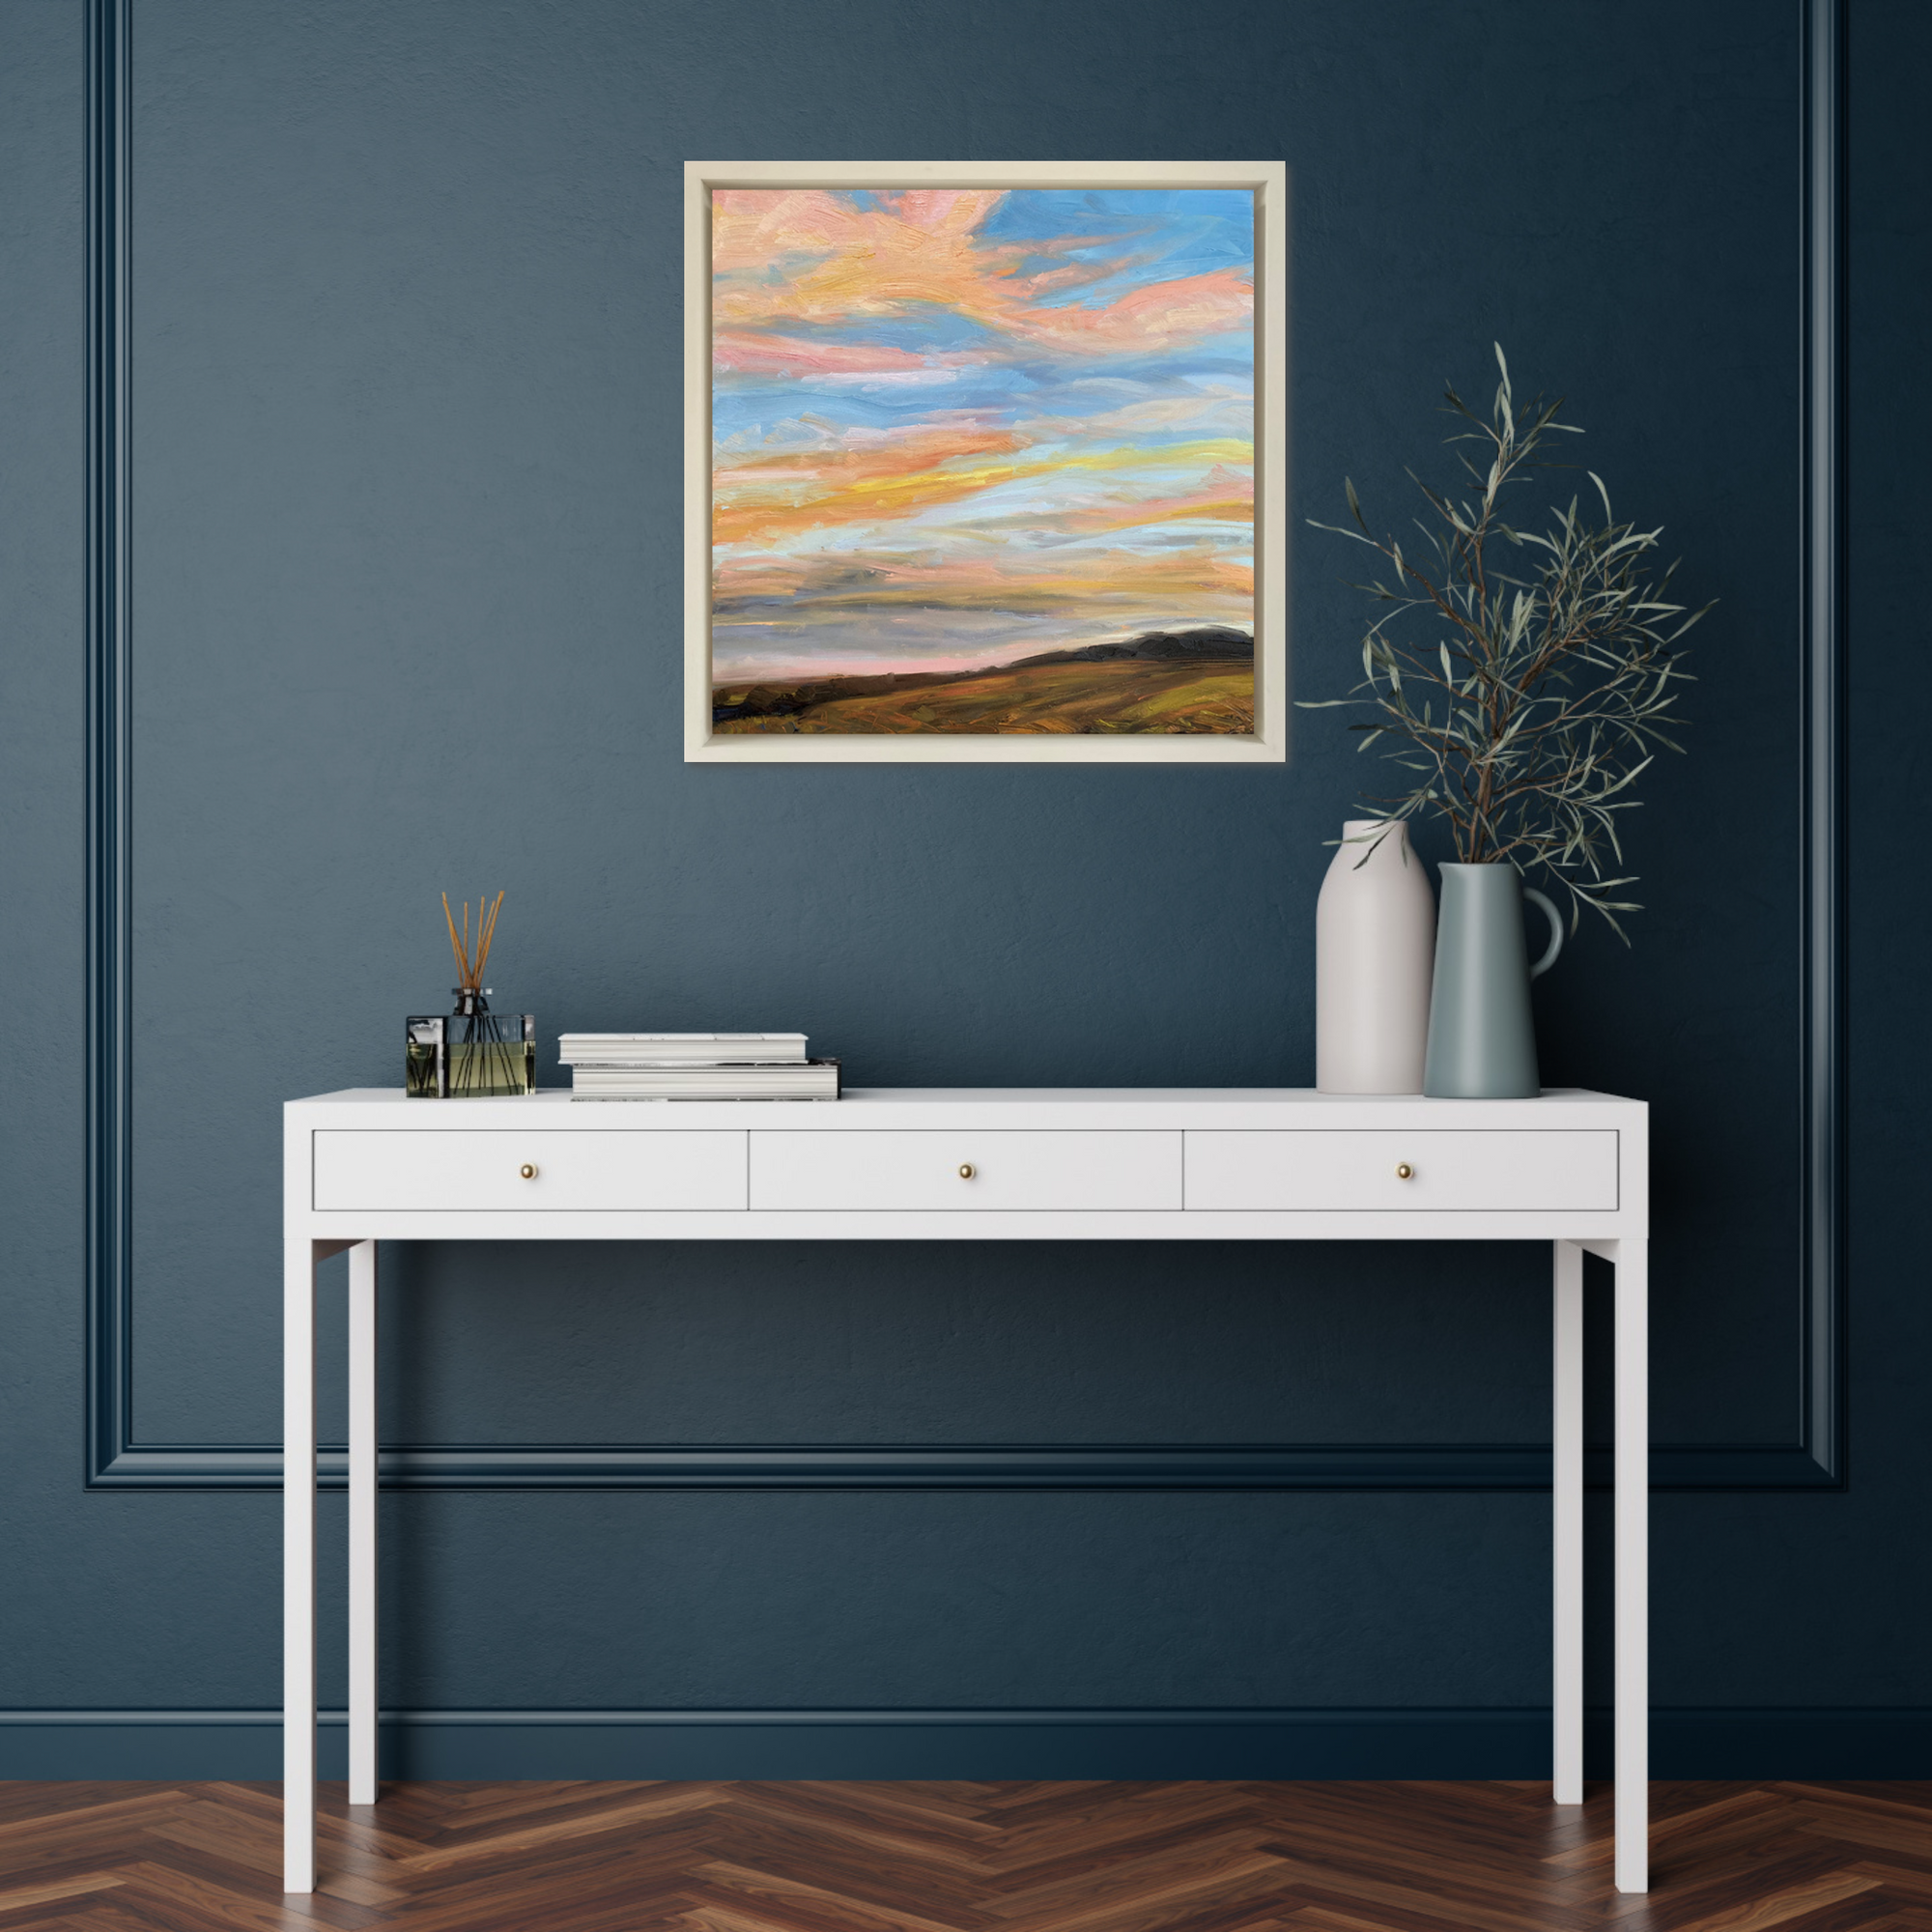 Neon Sky Original Oil Landscape Painting In Room Setting 2